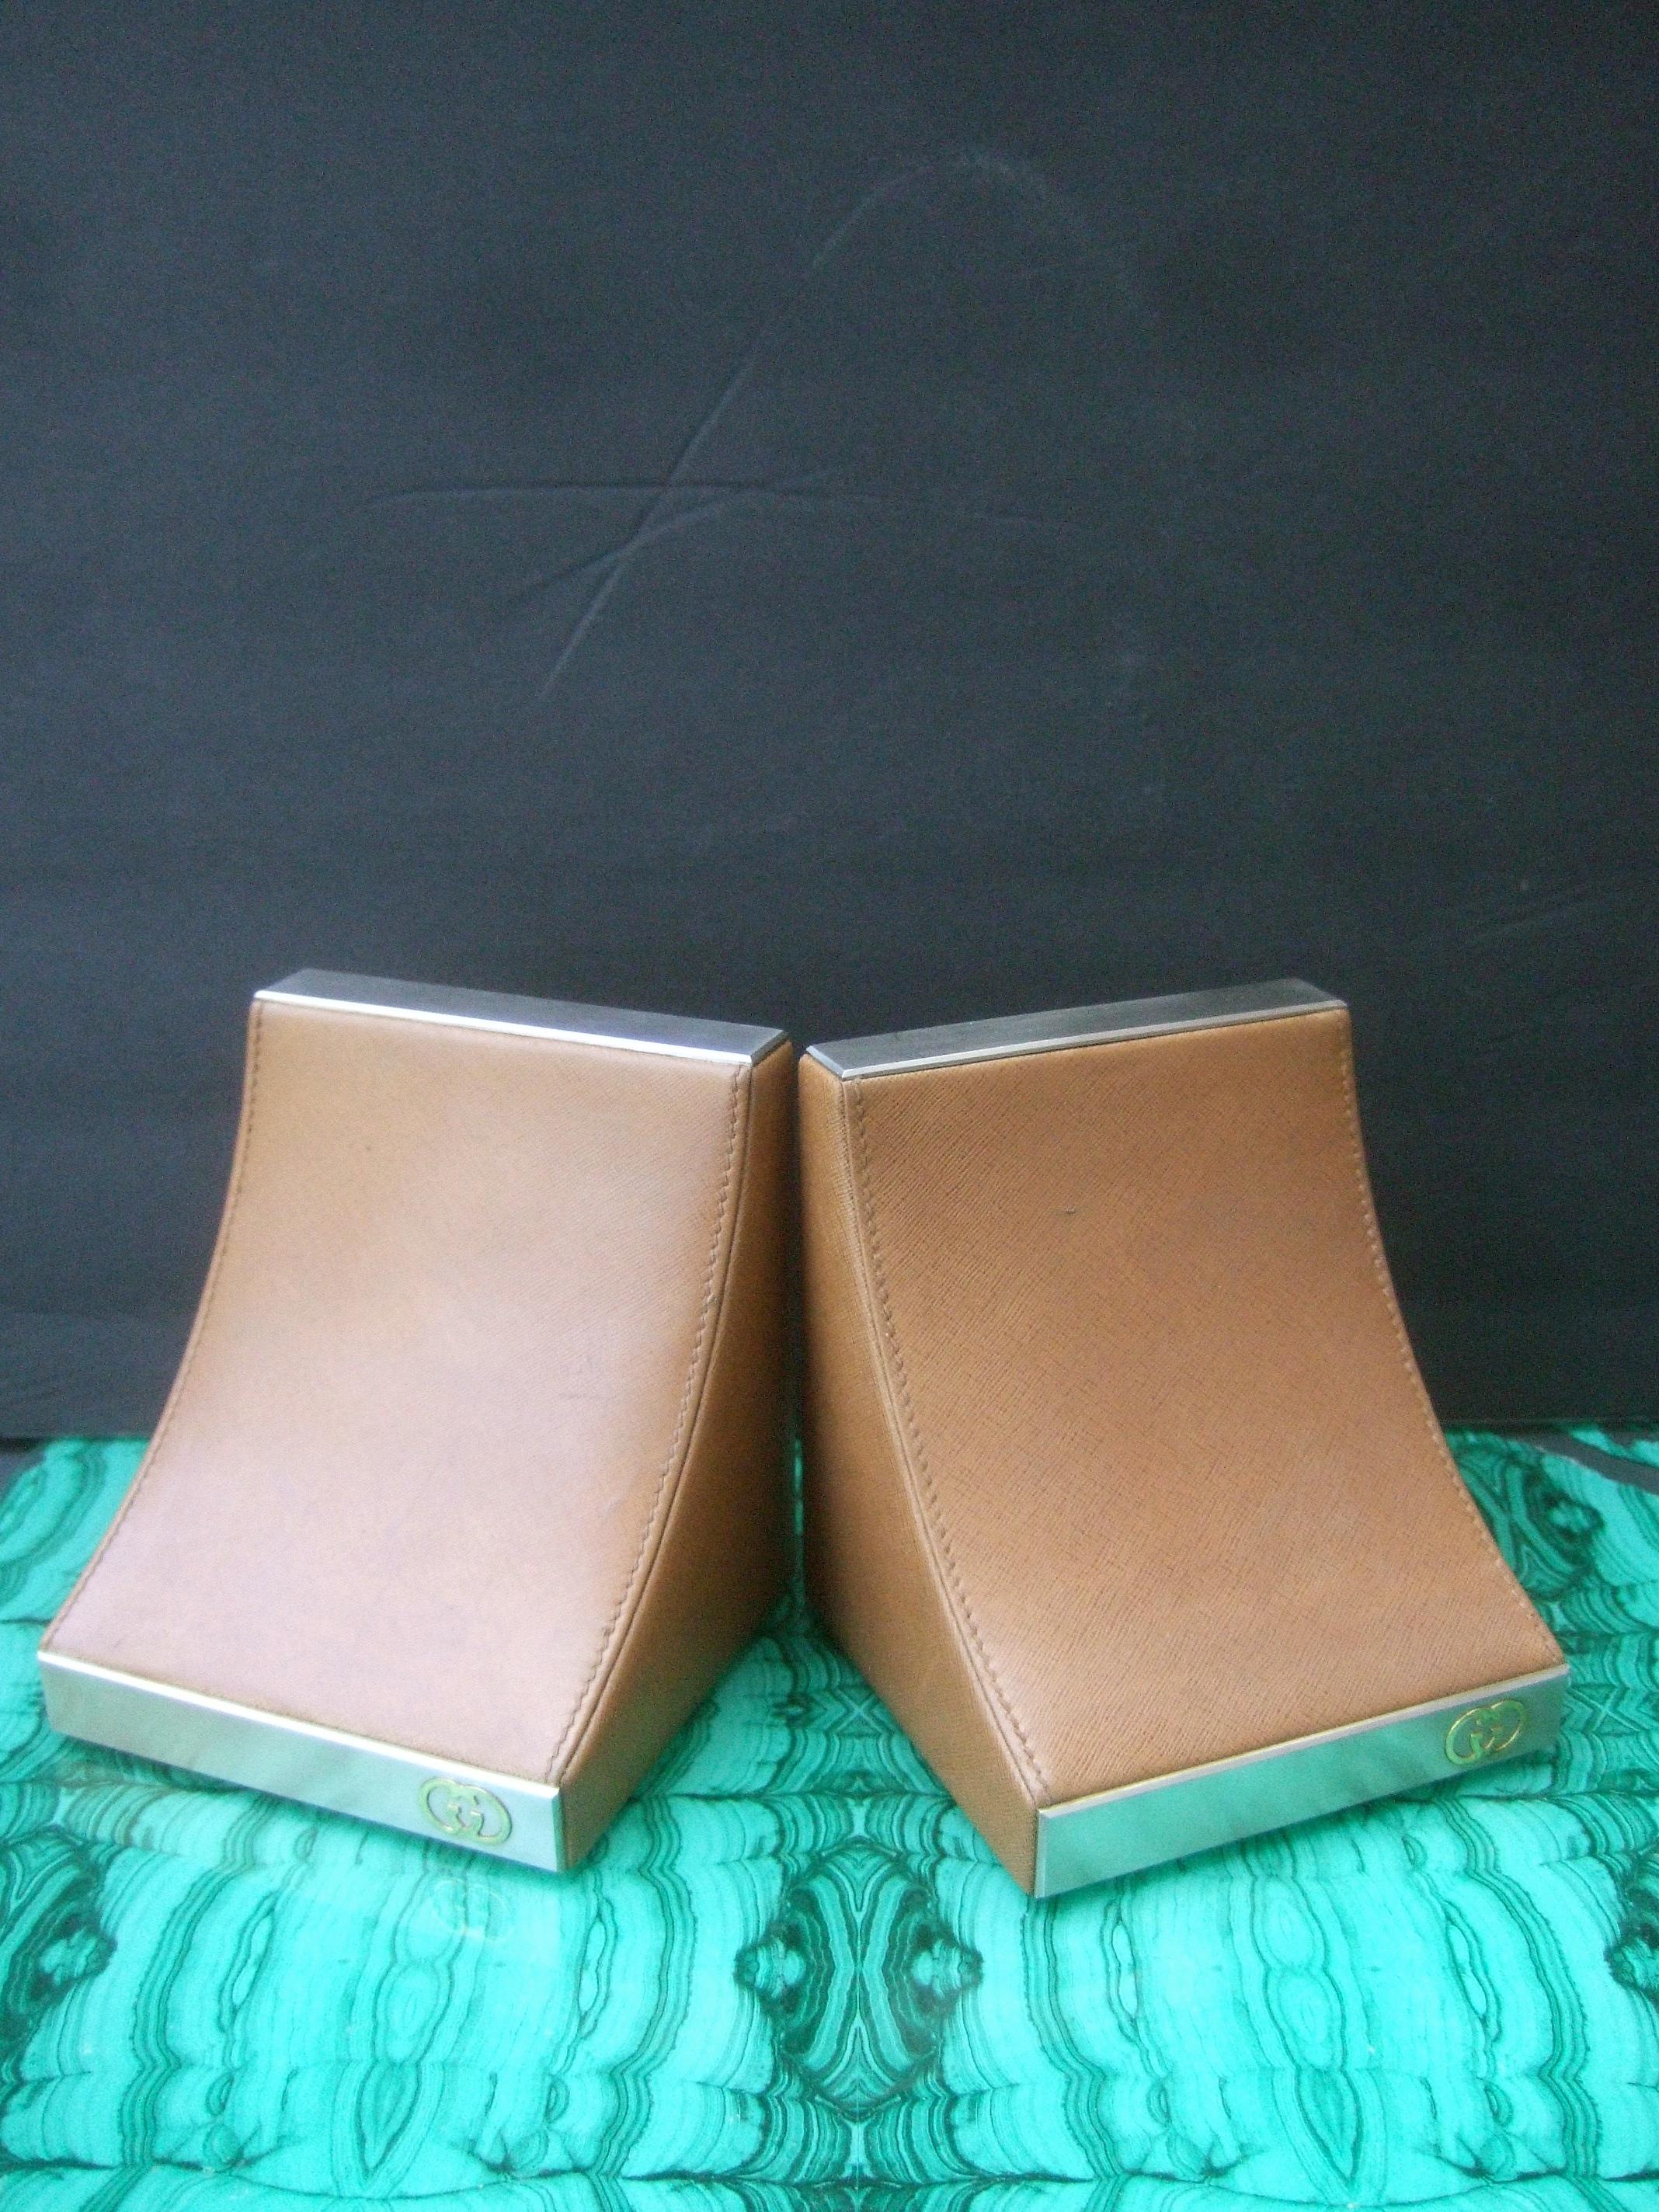 Women's or Men's Gucci Italy Rare Caramel Brown Leather Pair of Bookends c 1970s 